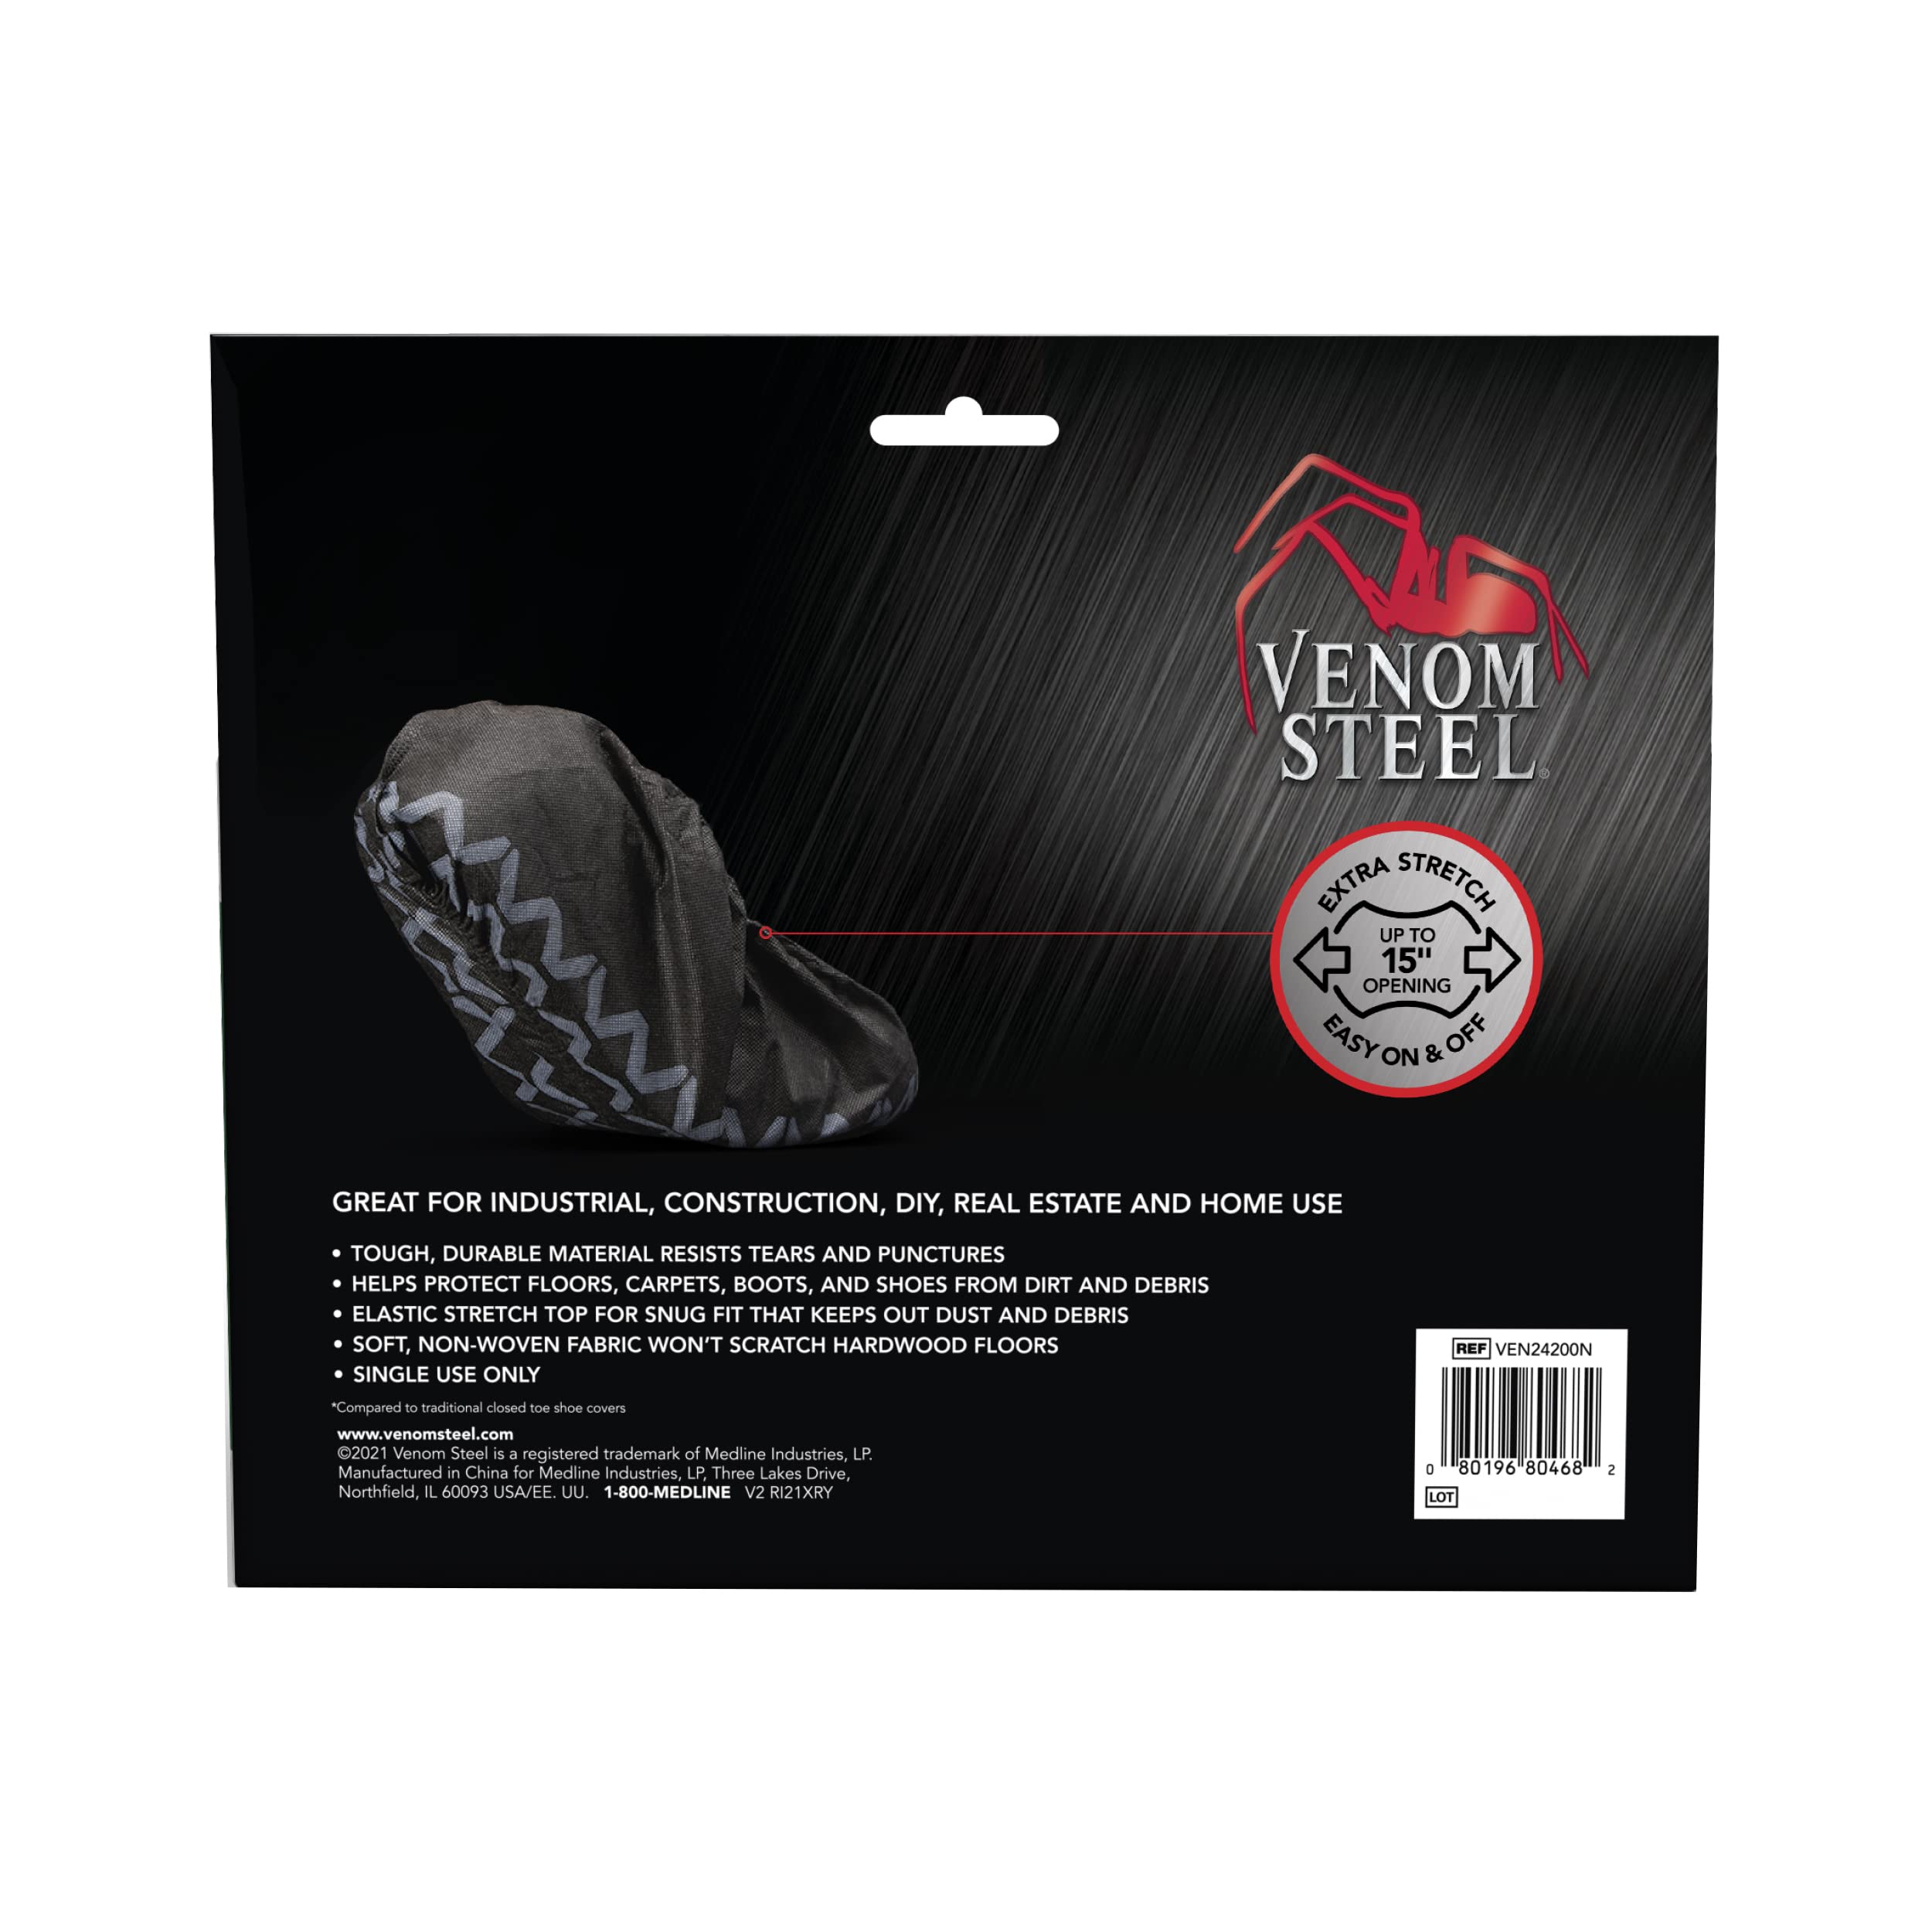 Venom Steel Boot and Shoe Covers, Tough, Easy On, Fits Over Boots, Improved Grip, Value Pack, 12 Pairs Per Box